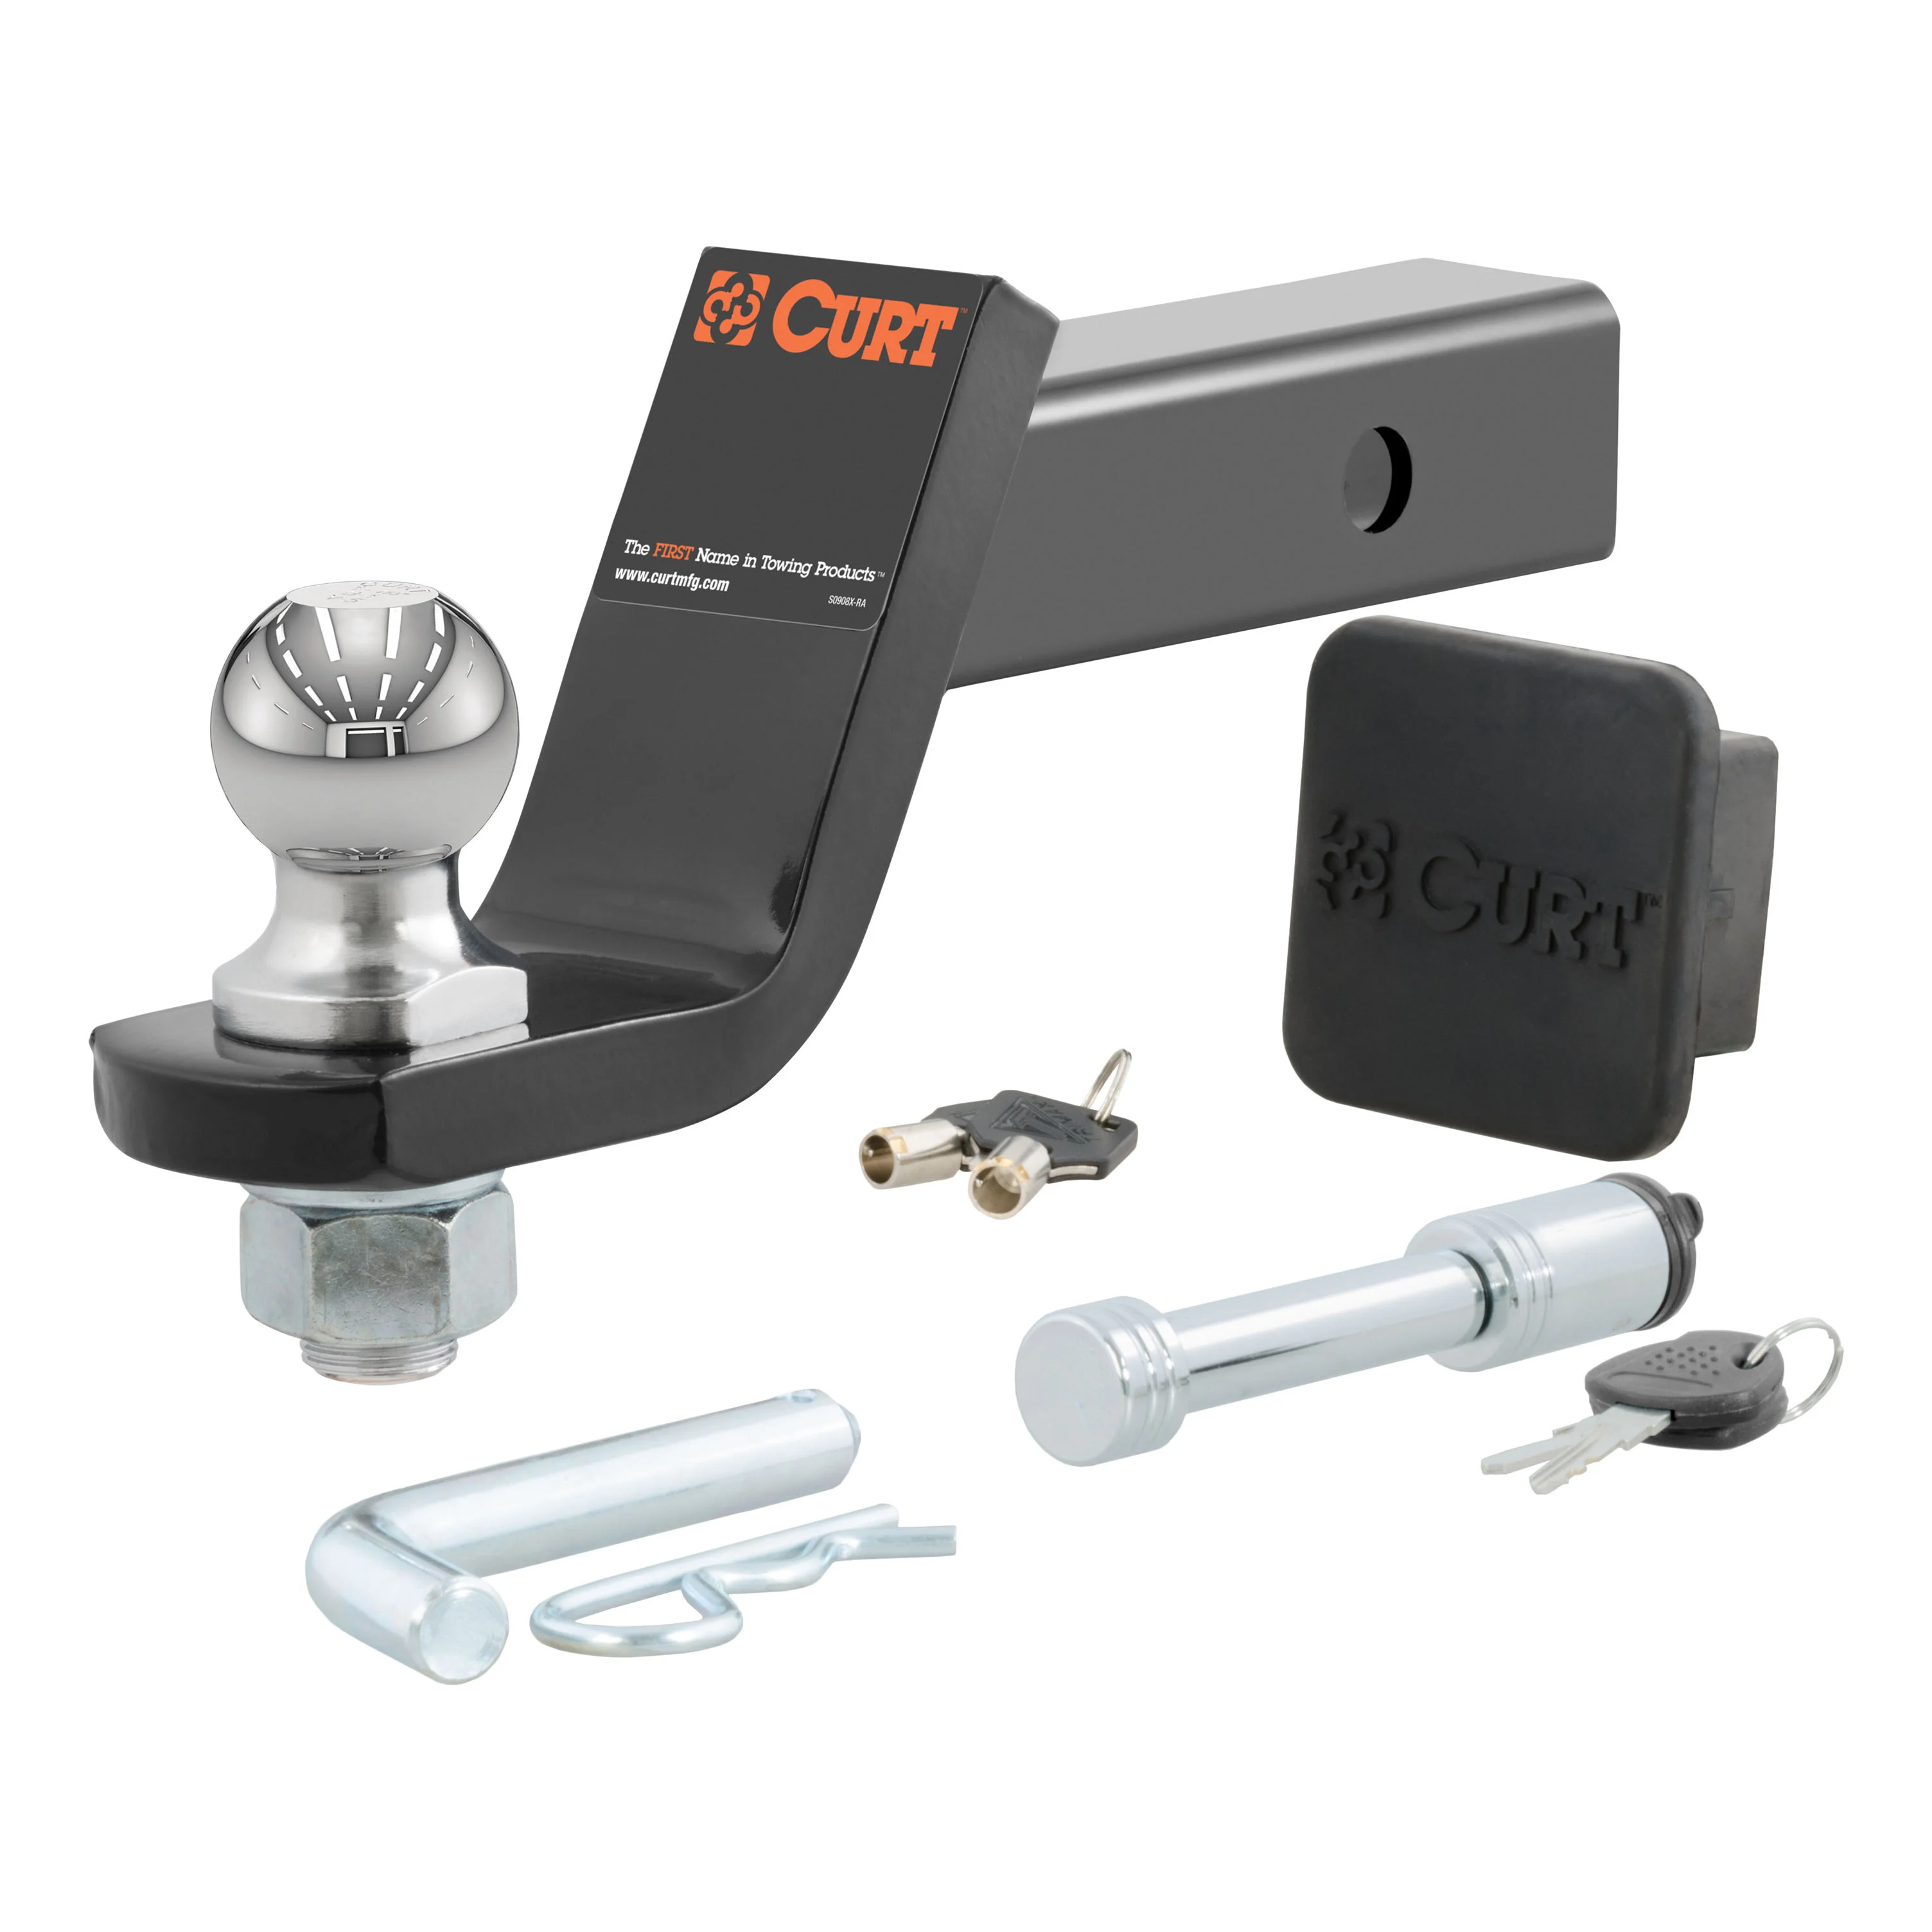 2012 Dodge Durango Curt Towing Starter Kit 2-inch ball, 2-inch shank with 4-inch drop 68628506AA